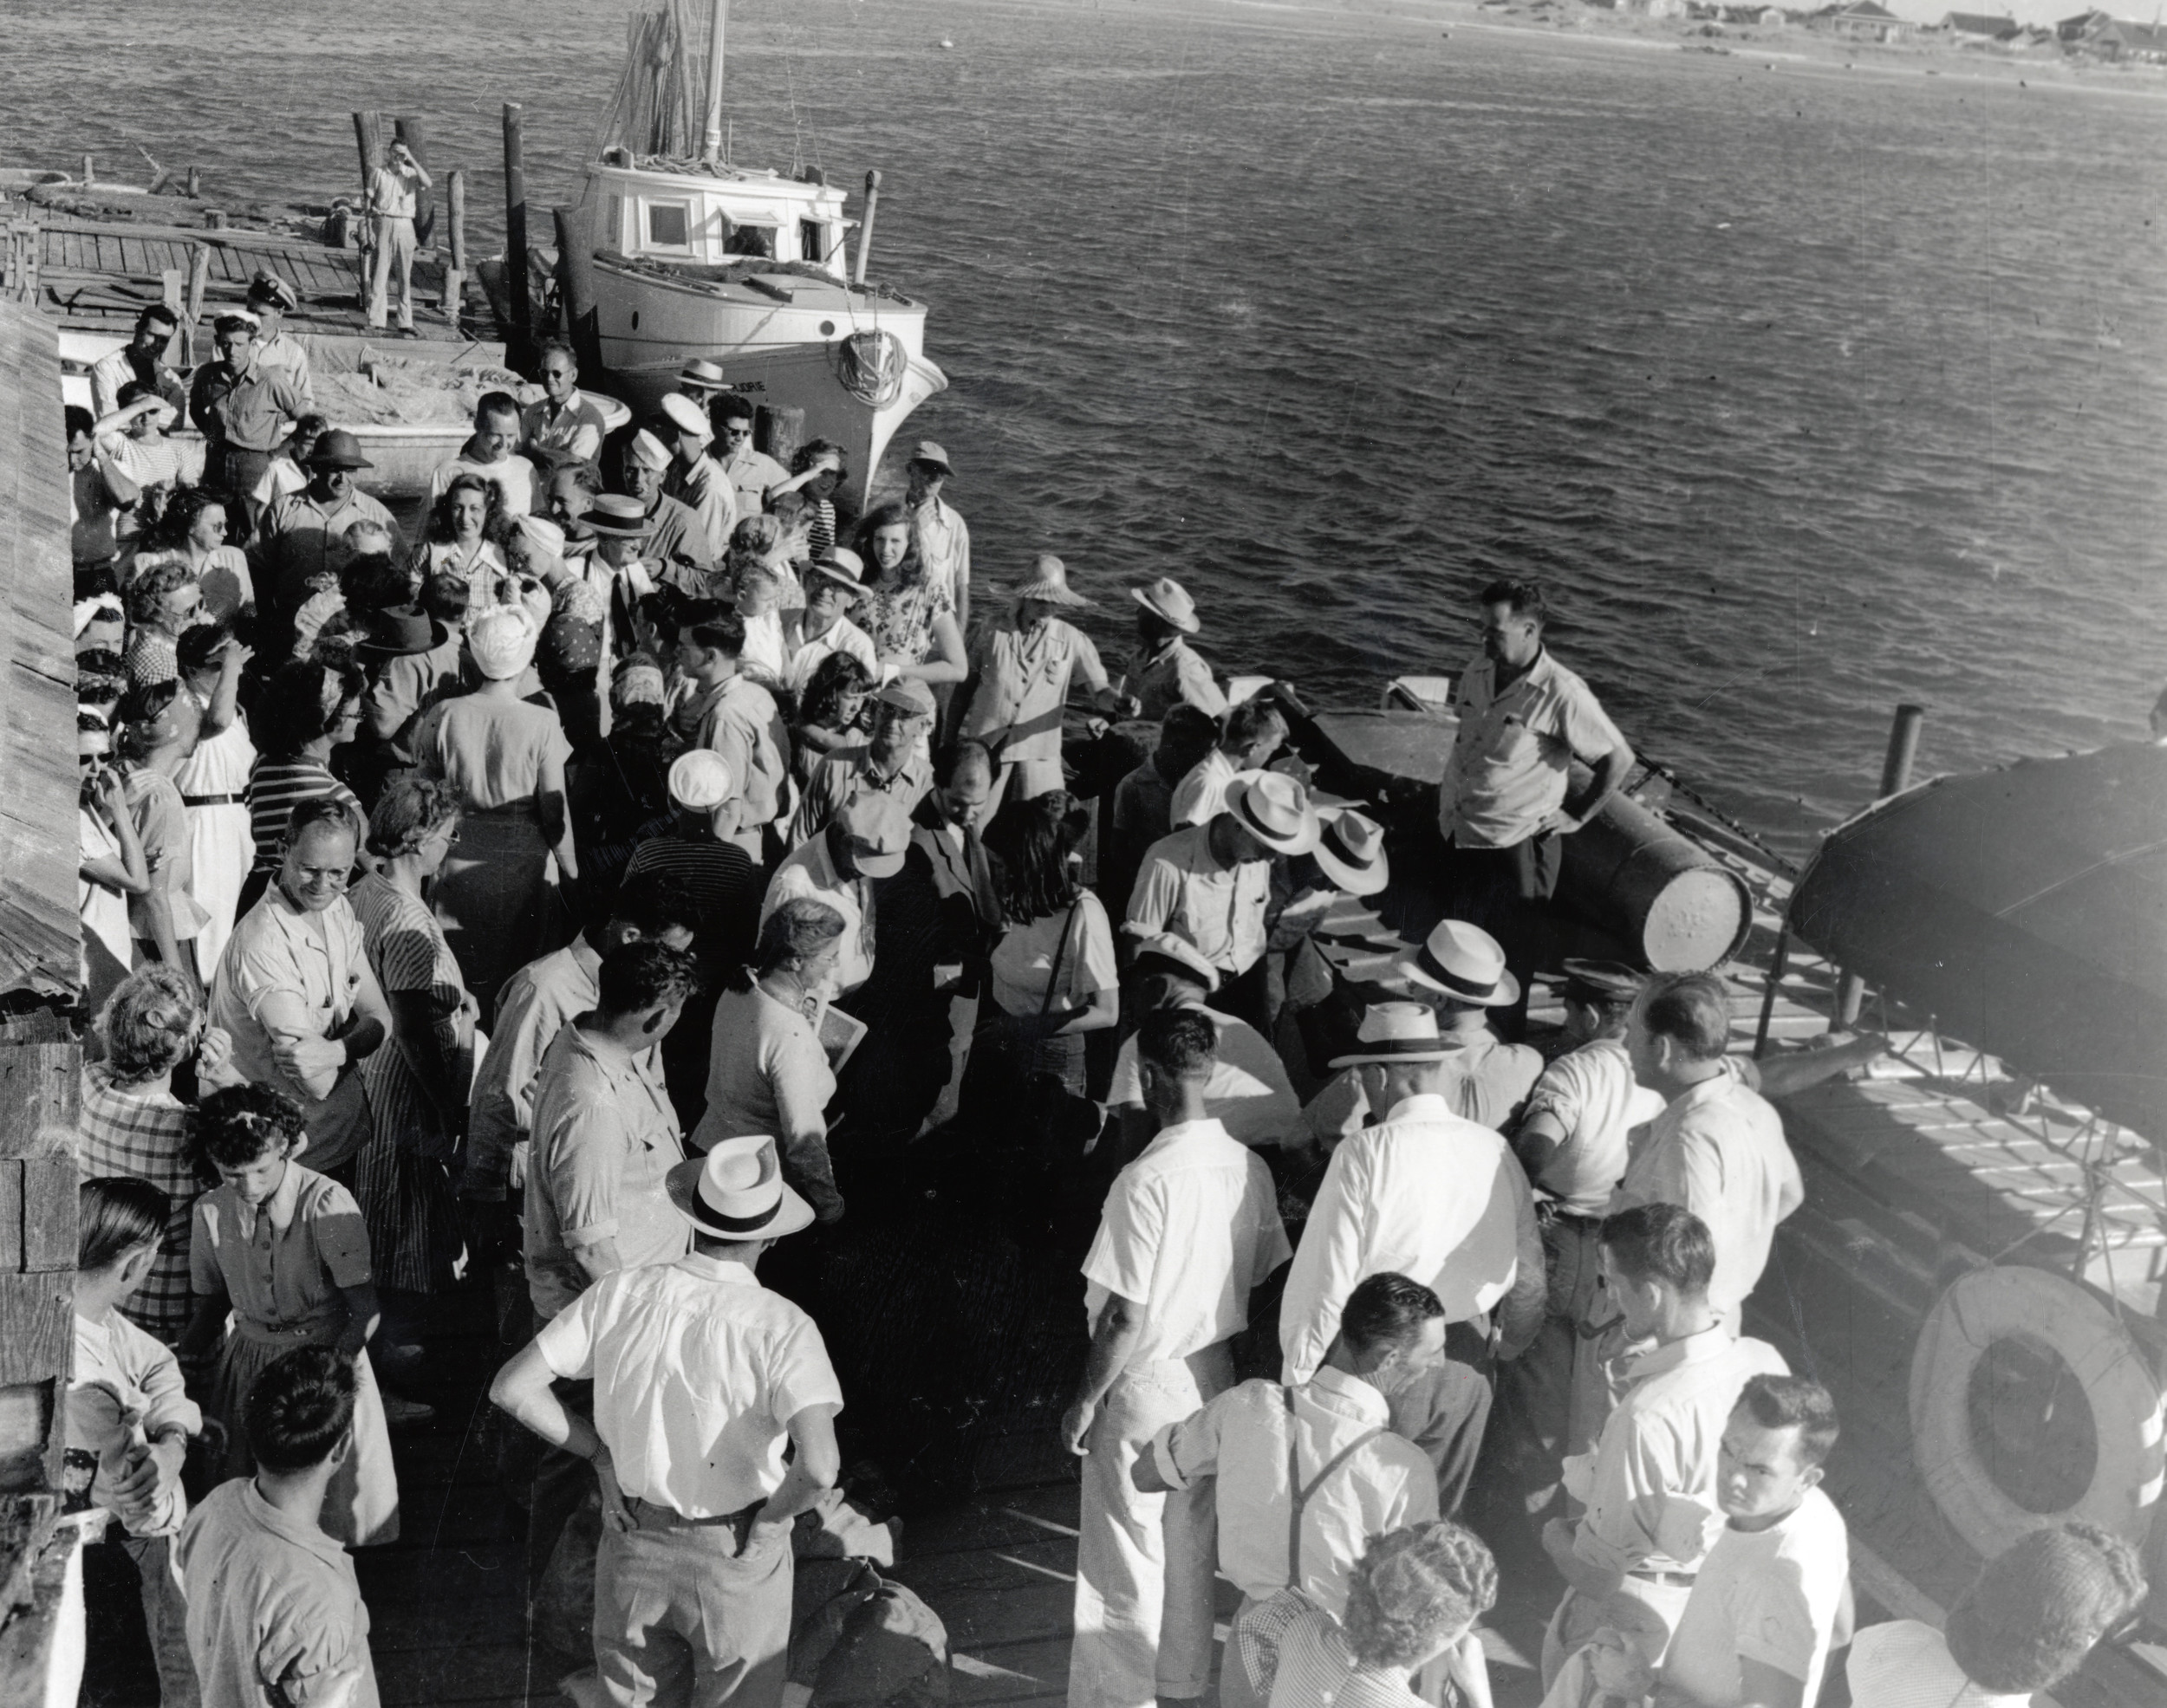 Outreach - Port Light Project Crowd on Mailboat Pier, Ocracoke, 1945 - Aycock Brown Collection, 2003 Acquisition.jpg